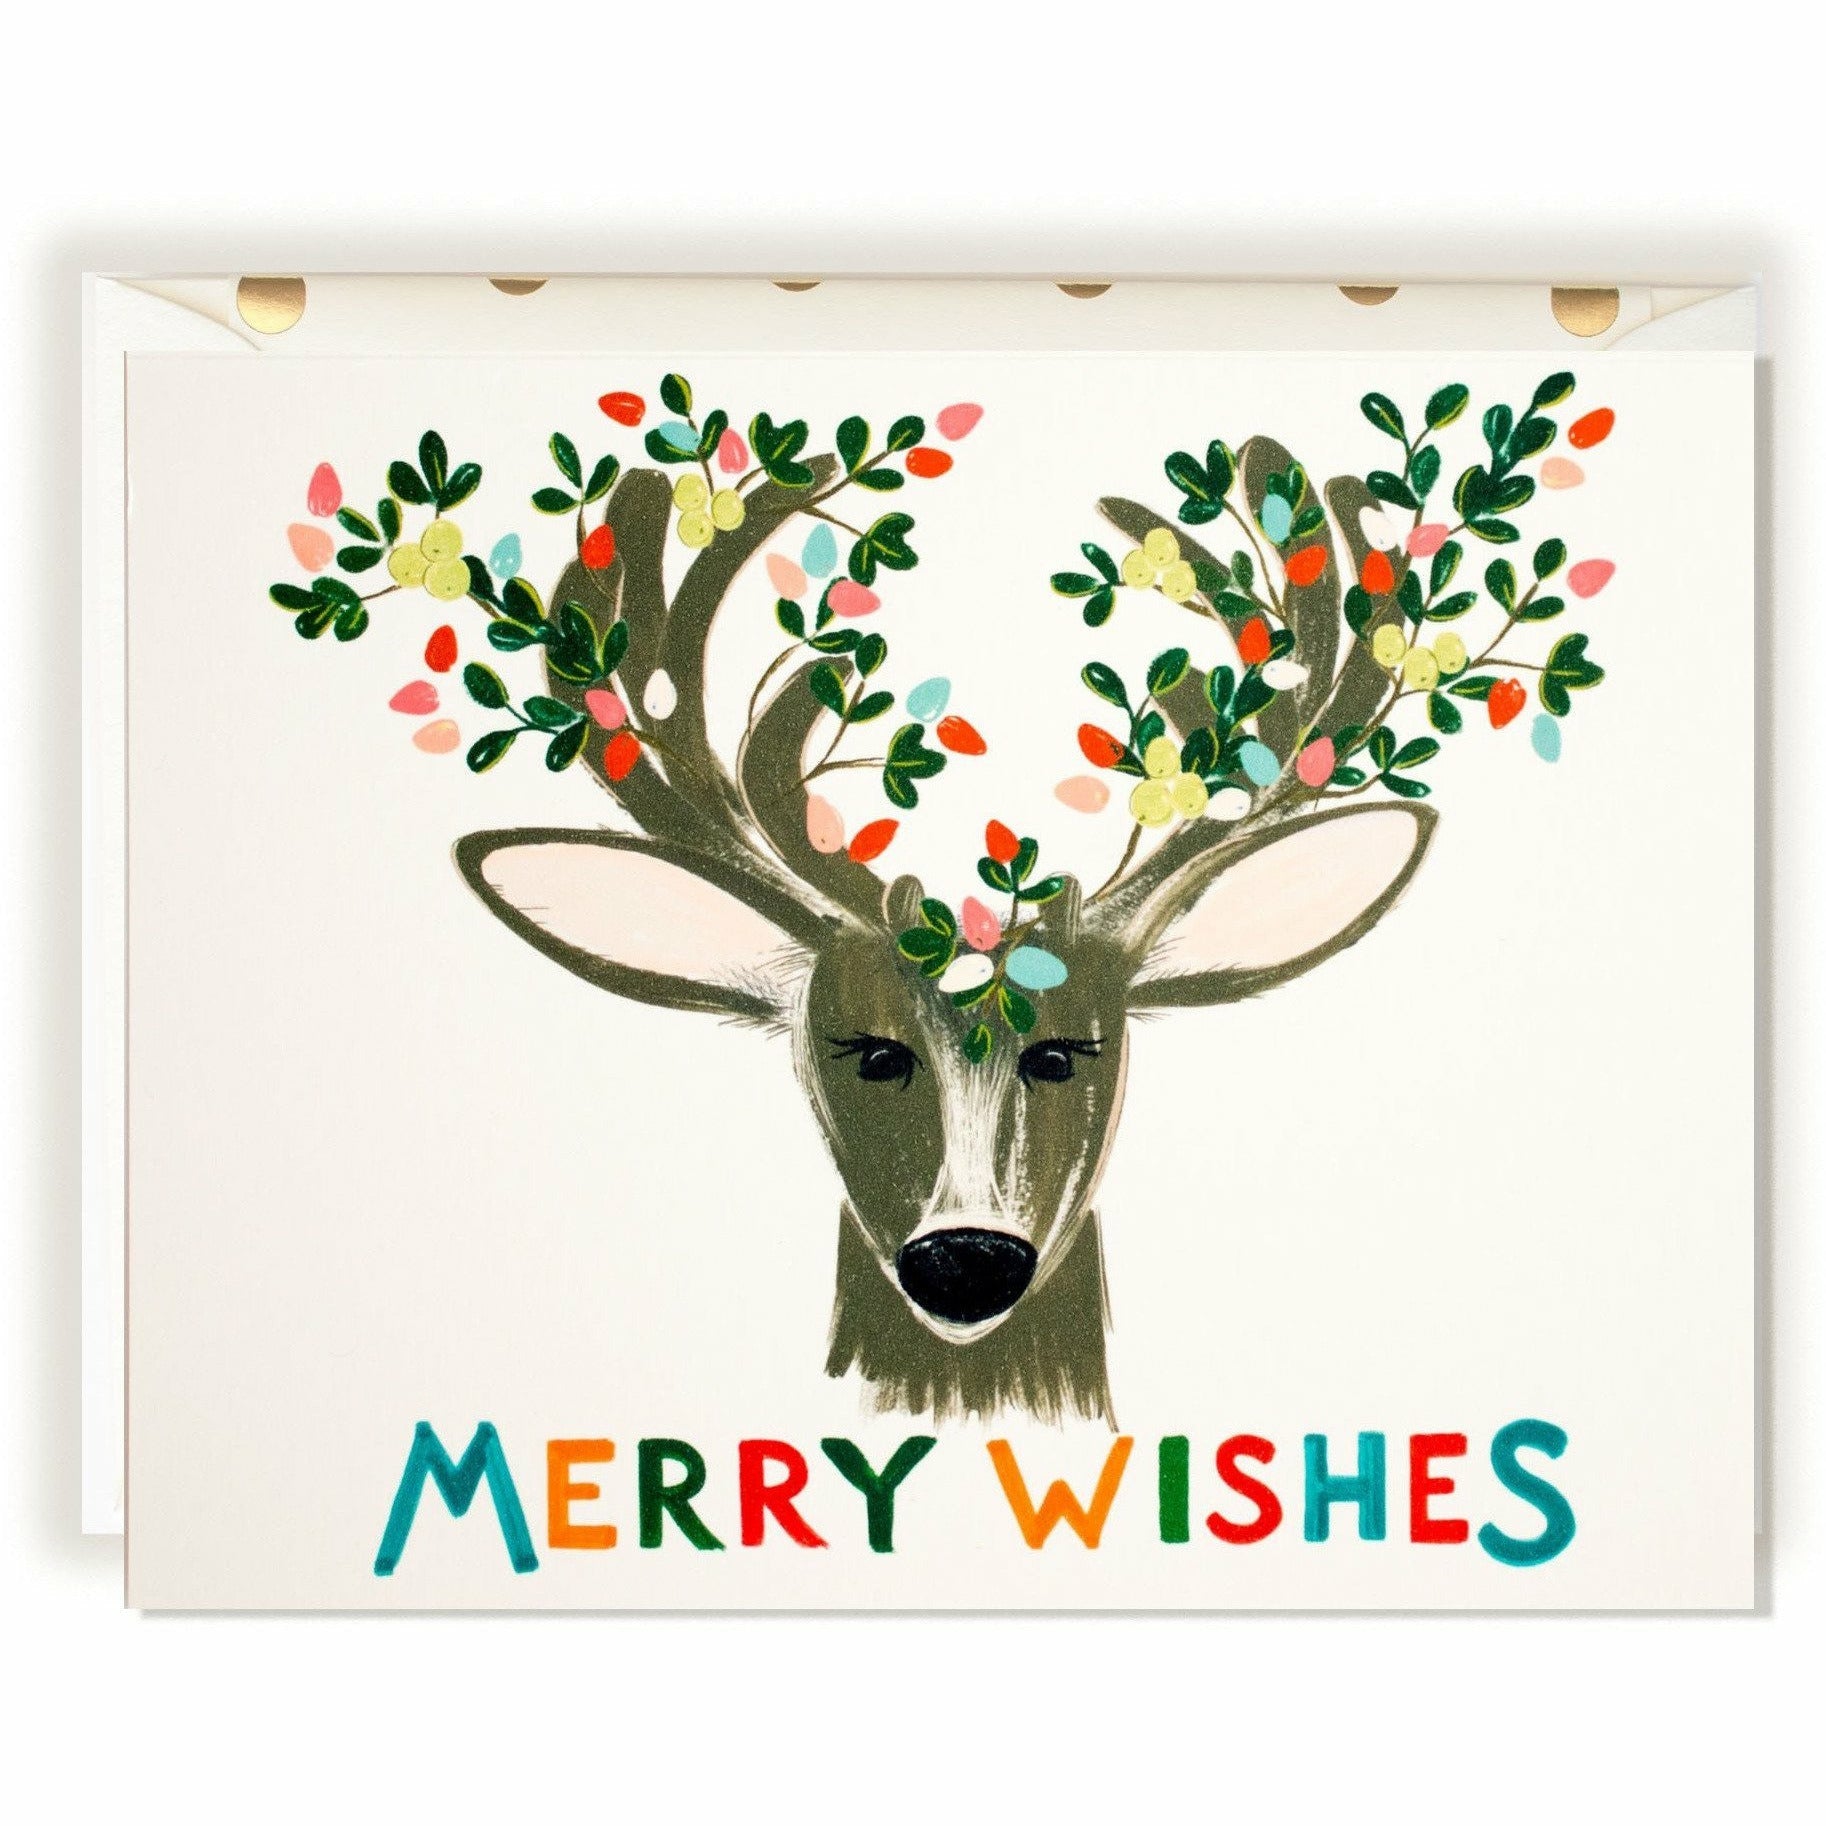 Colorful and Festive Holiday Season "Merry Wishes" Card with Deer - The First Snow